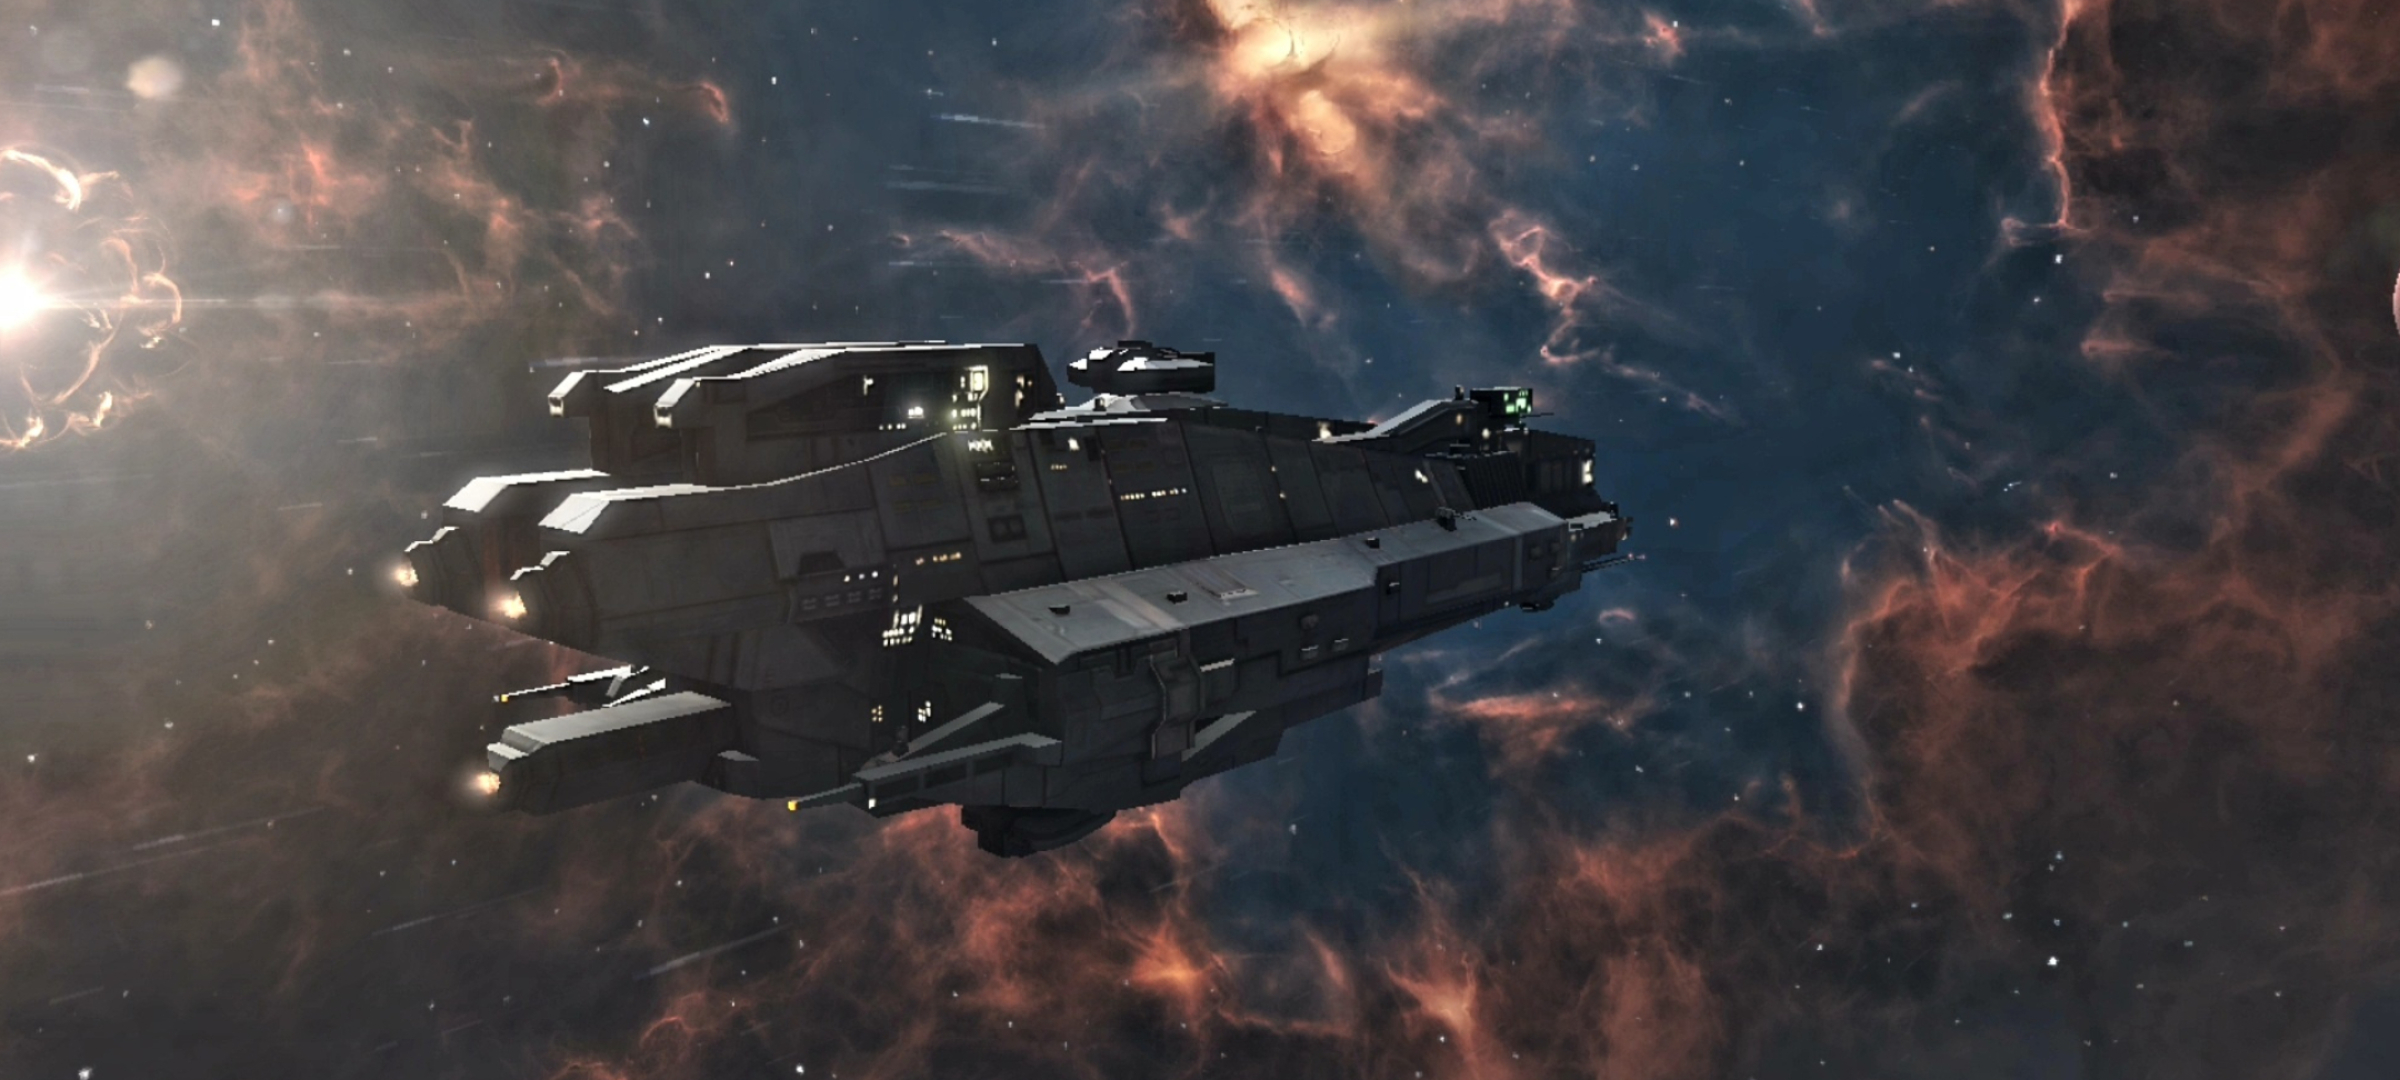 Infinite Lagrange: Space simulation game, Ships are required to make Fleets for Operations. 2400x1080 Dual Screen Background.